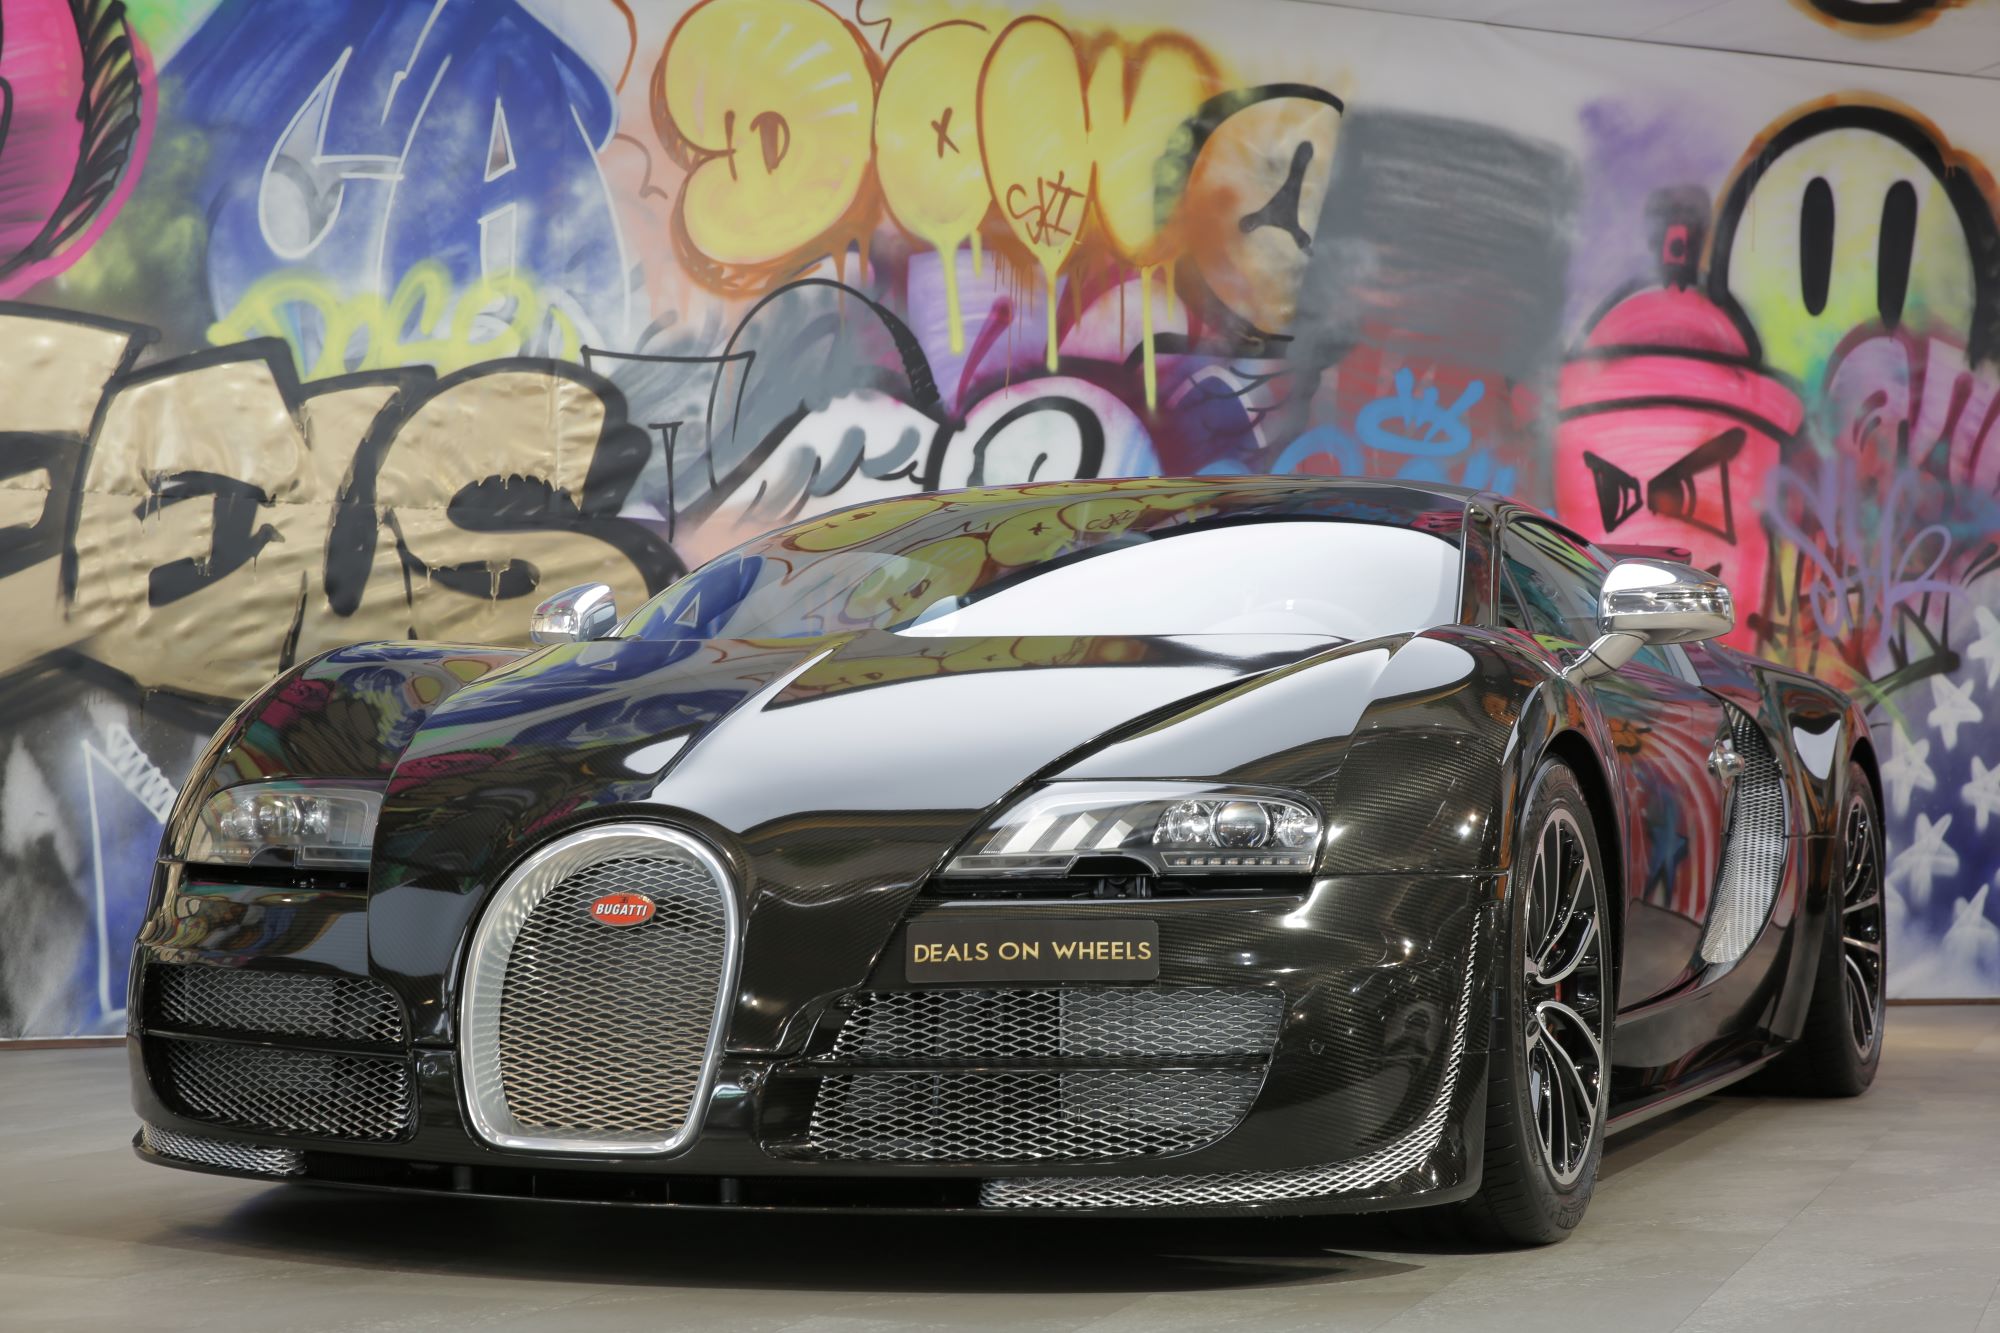 A black Bugatti Veyron Super Sport, the fastest car in the world, in front of a wall of graffiti.